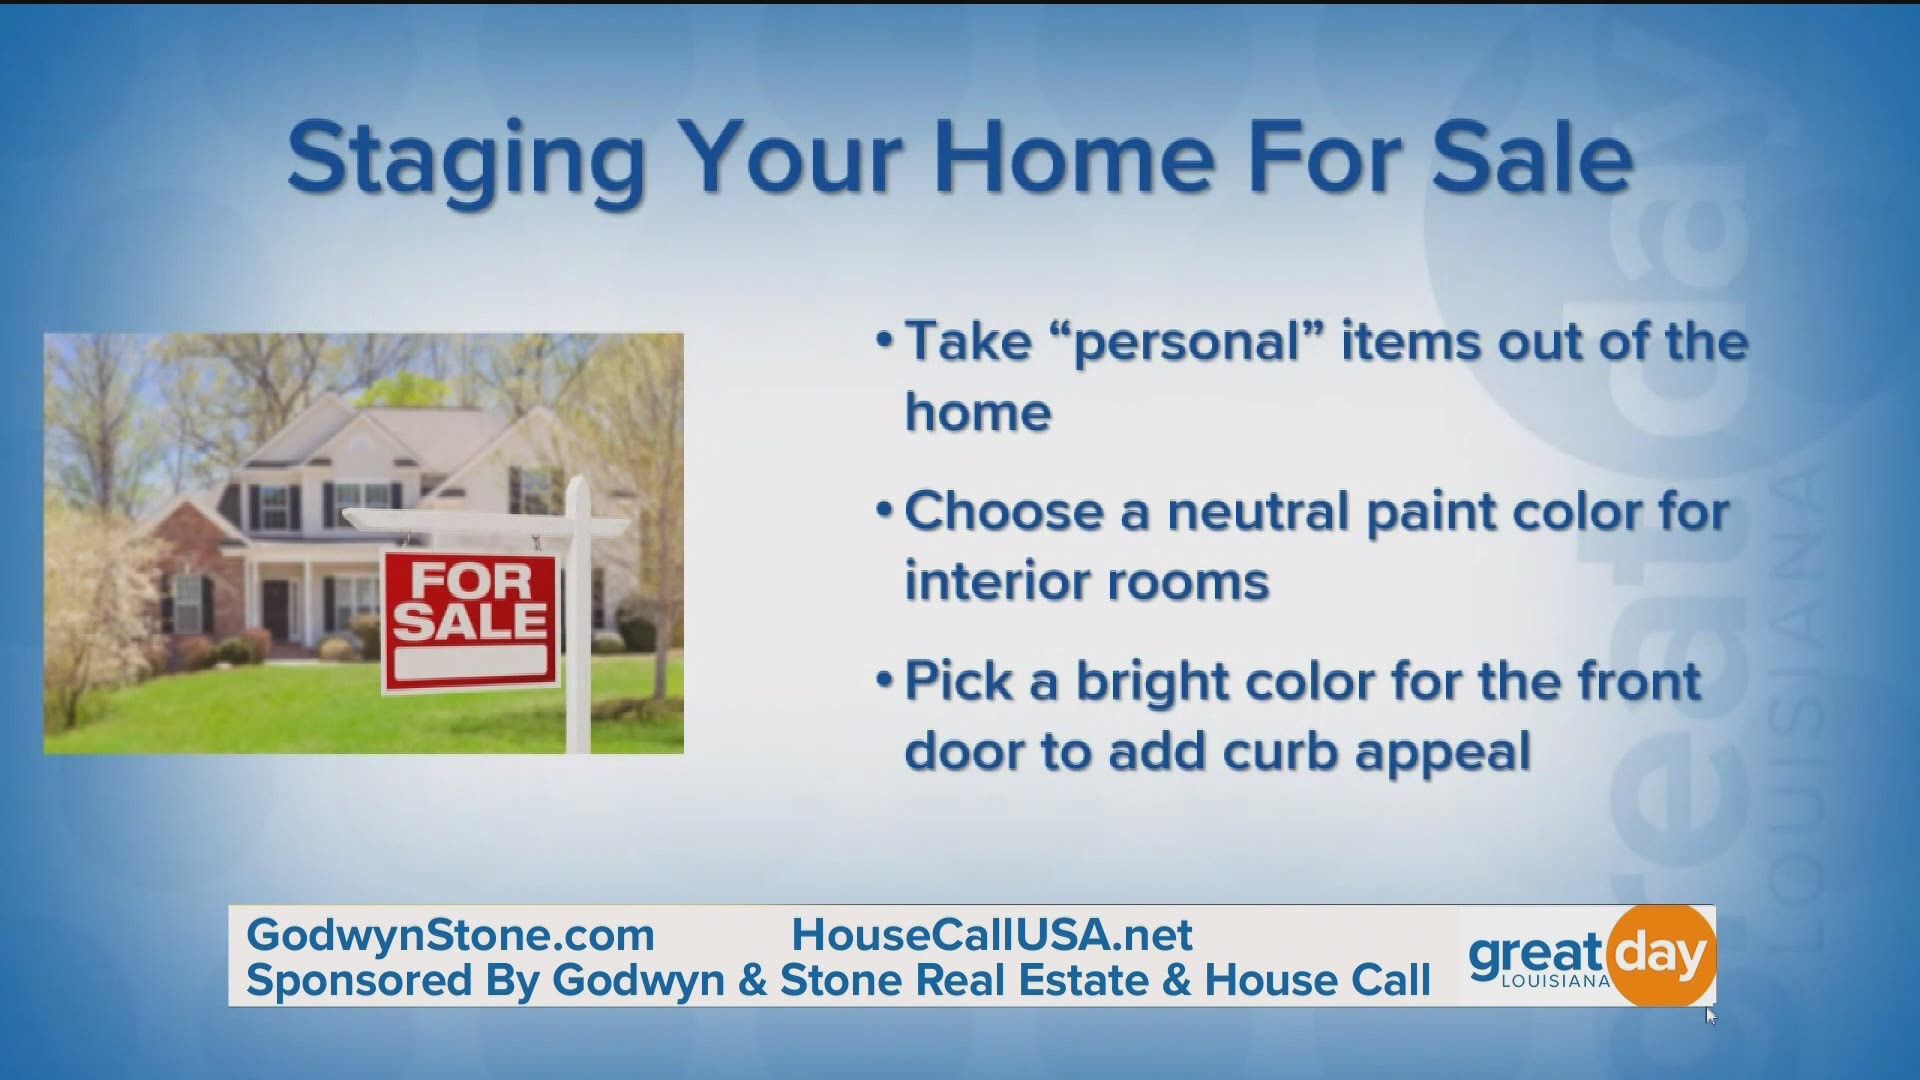 Brittany Picolo-Ramos, the star of HGTV’s Selling the Big Easy and Co-Owner of Godwyn & Stone Real Estate gives some great tips for selling your home.